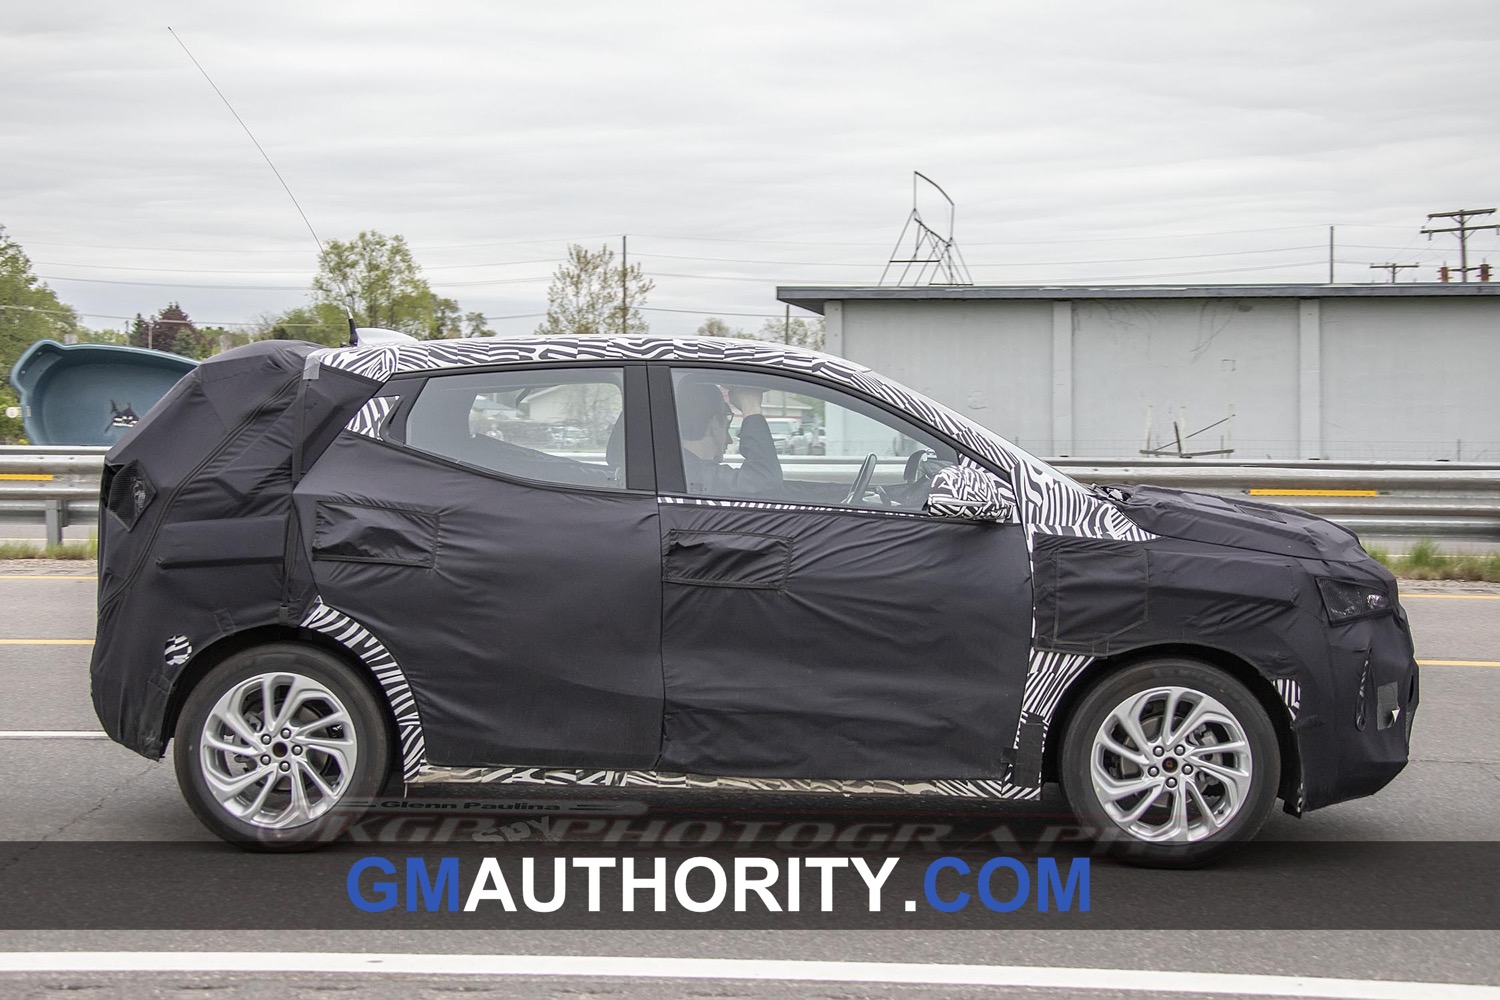 First Spy Shots Of Upcoming Chevy Bolt EUV Surface | GM Authority